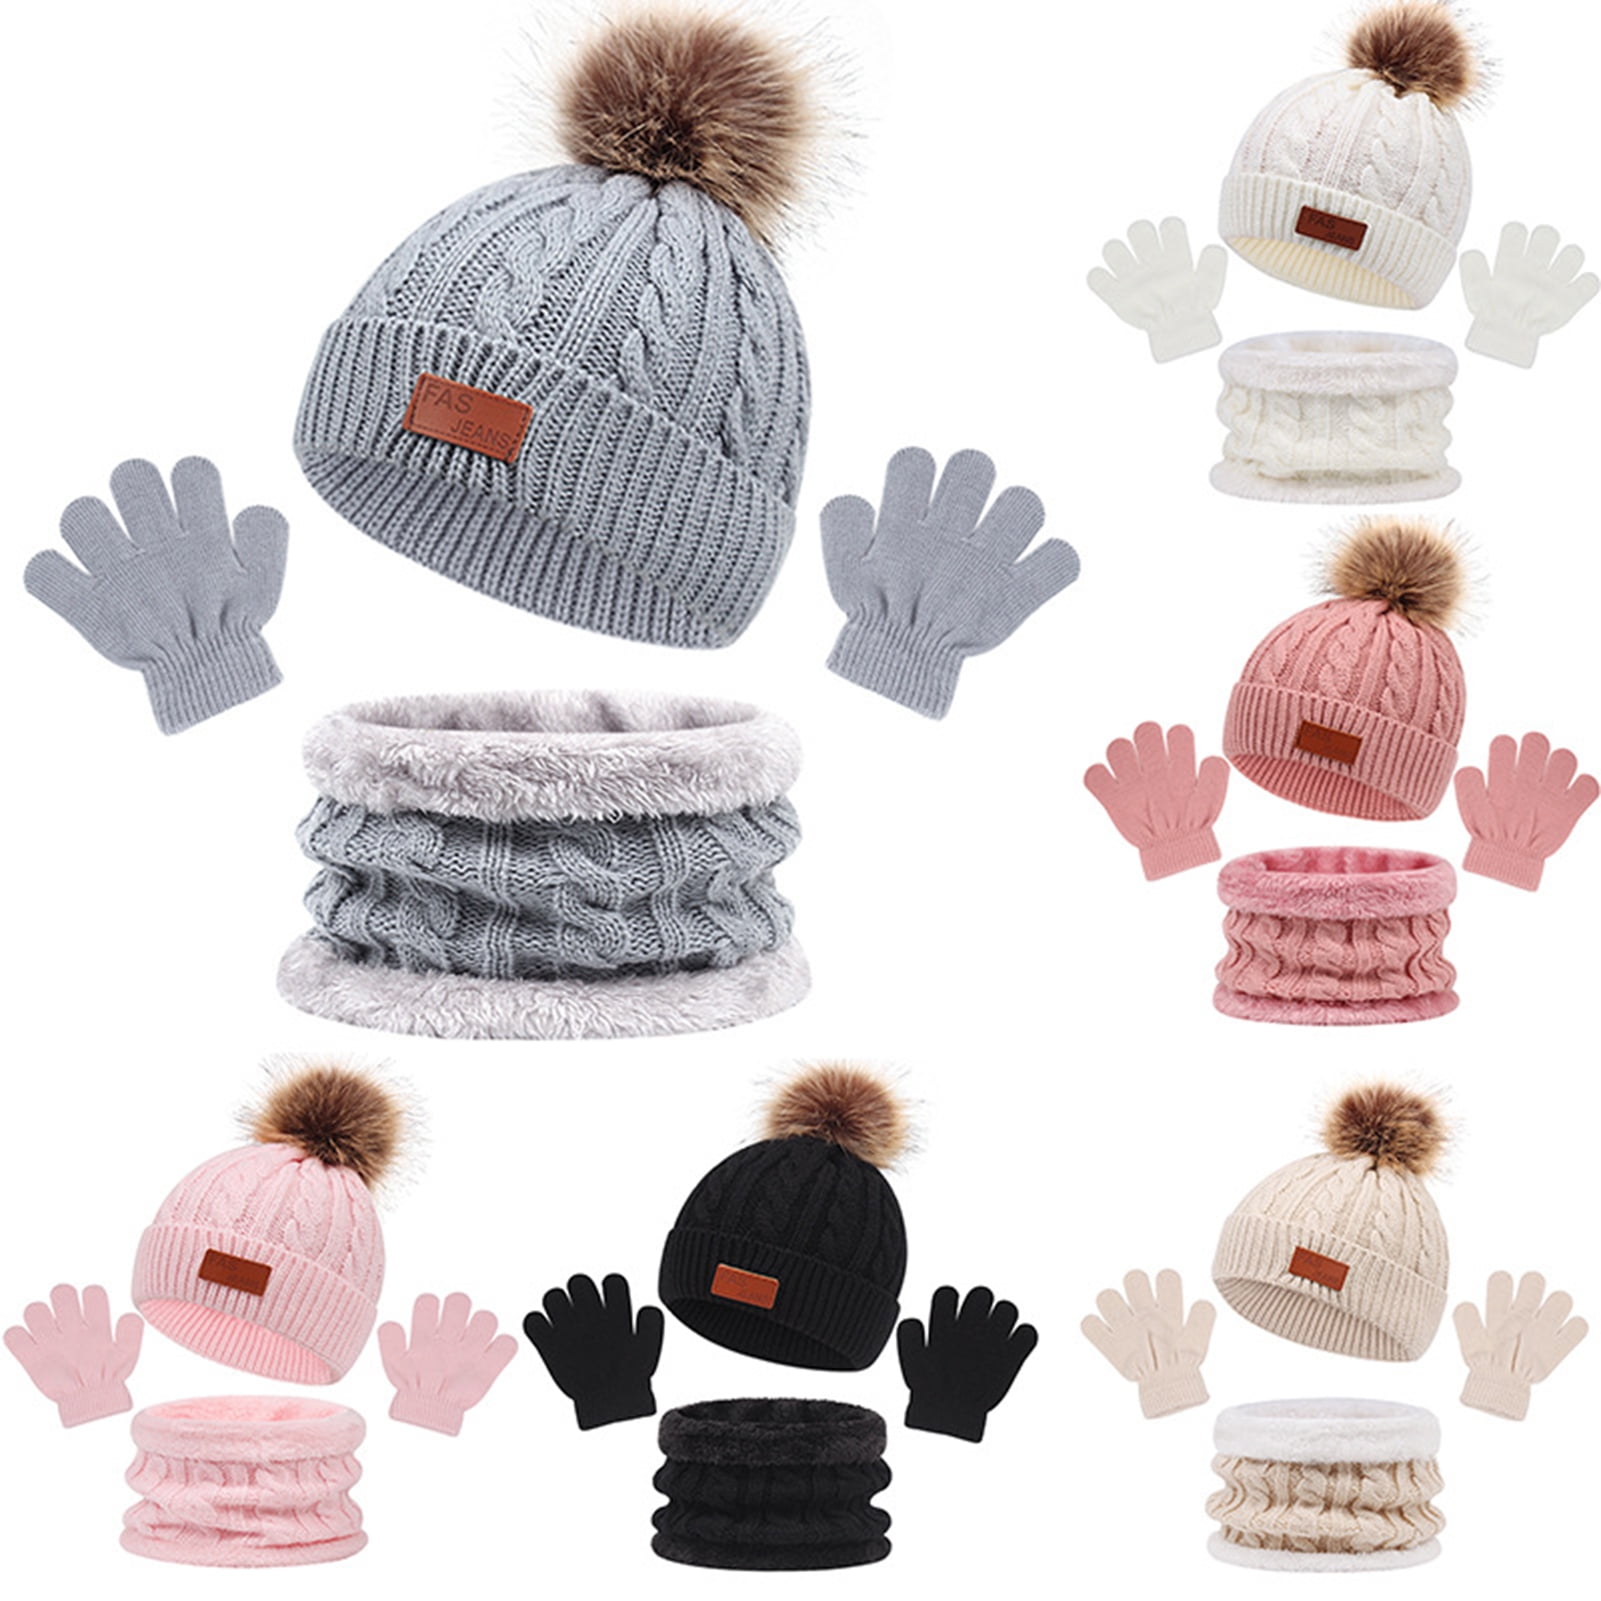 Buy Colour Block Hat, Scarf & Mittens Set 1-2 years, Accessories